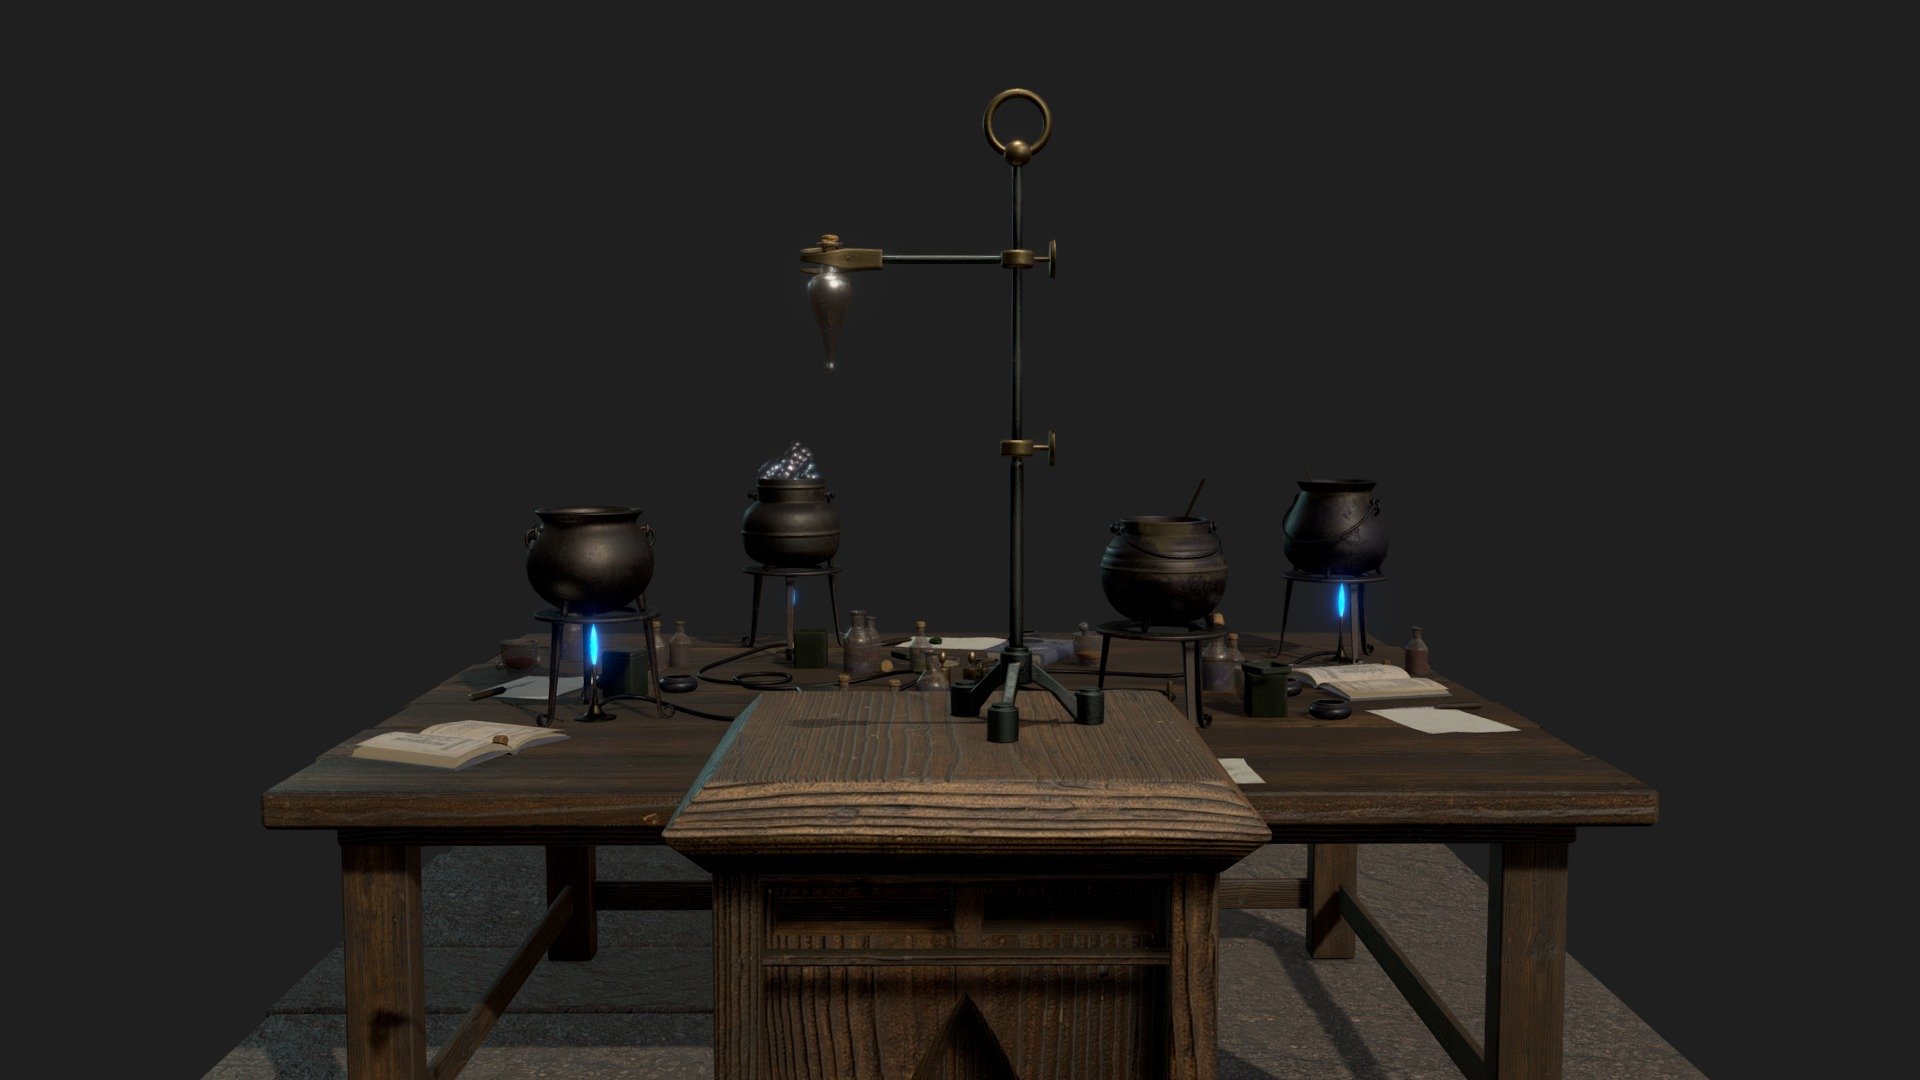 My first game-ready model. Thanks to XYZ School for learning and special thanks to my mentor Dmitry Kopeykin. 

Tris: 50 823 

“Yes. That. Well, that one, ladies and gentlemen, is a most curious little potion called Felix Felicis. I take it,” he turned, smiling, to look at Hermione, who had let out an audible gasp, “that you know what Felix Felicis does, Miss Granger?”
“It’s liquid luck,” said Hermione excitedly. “It makes you lucky!”
The whole class seemed to sit up a little straighter.